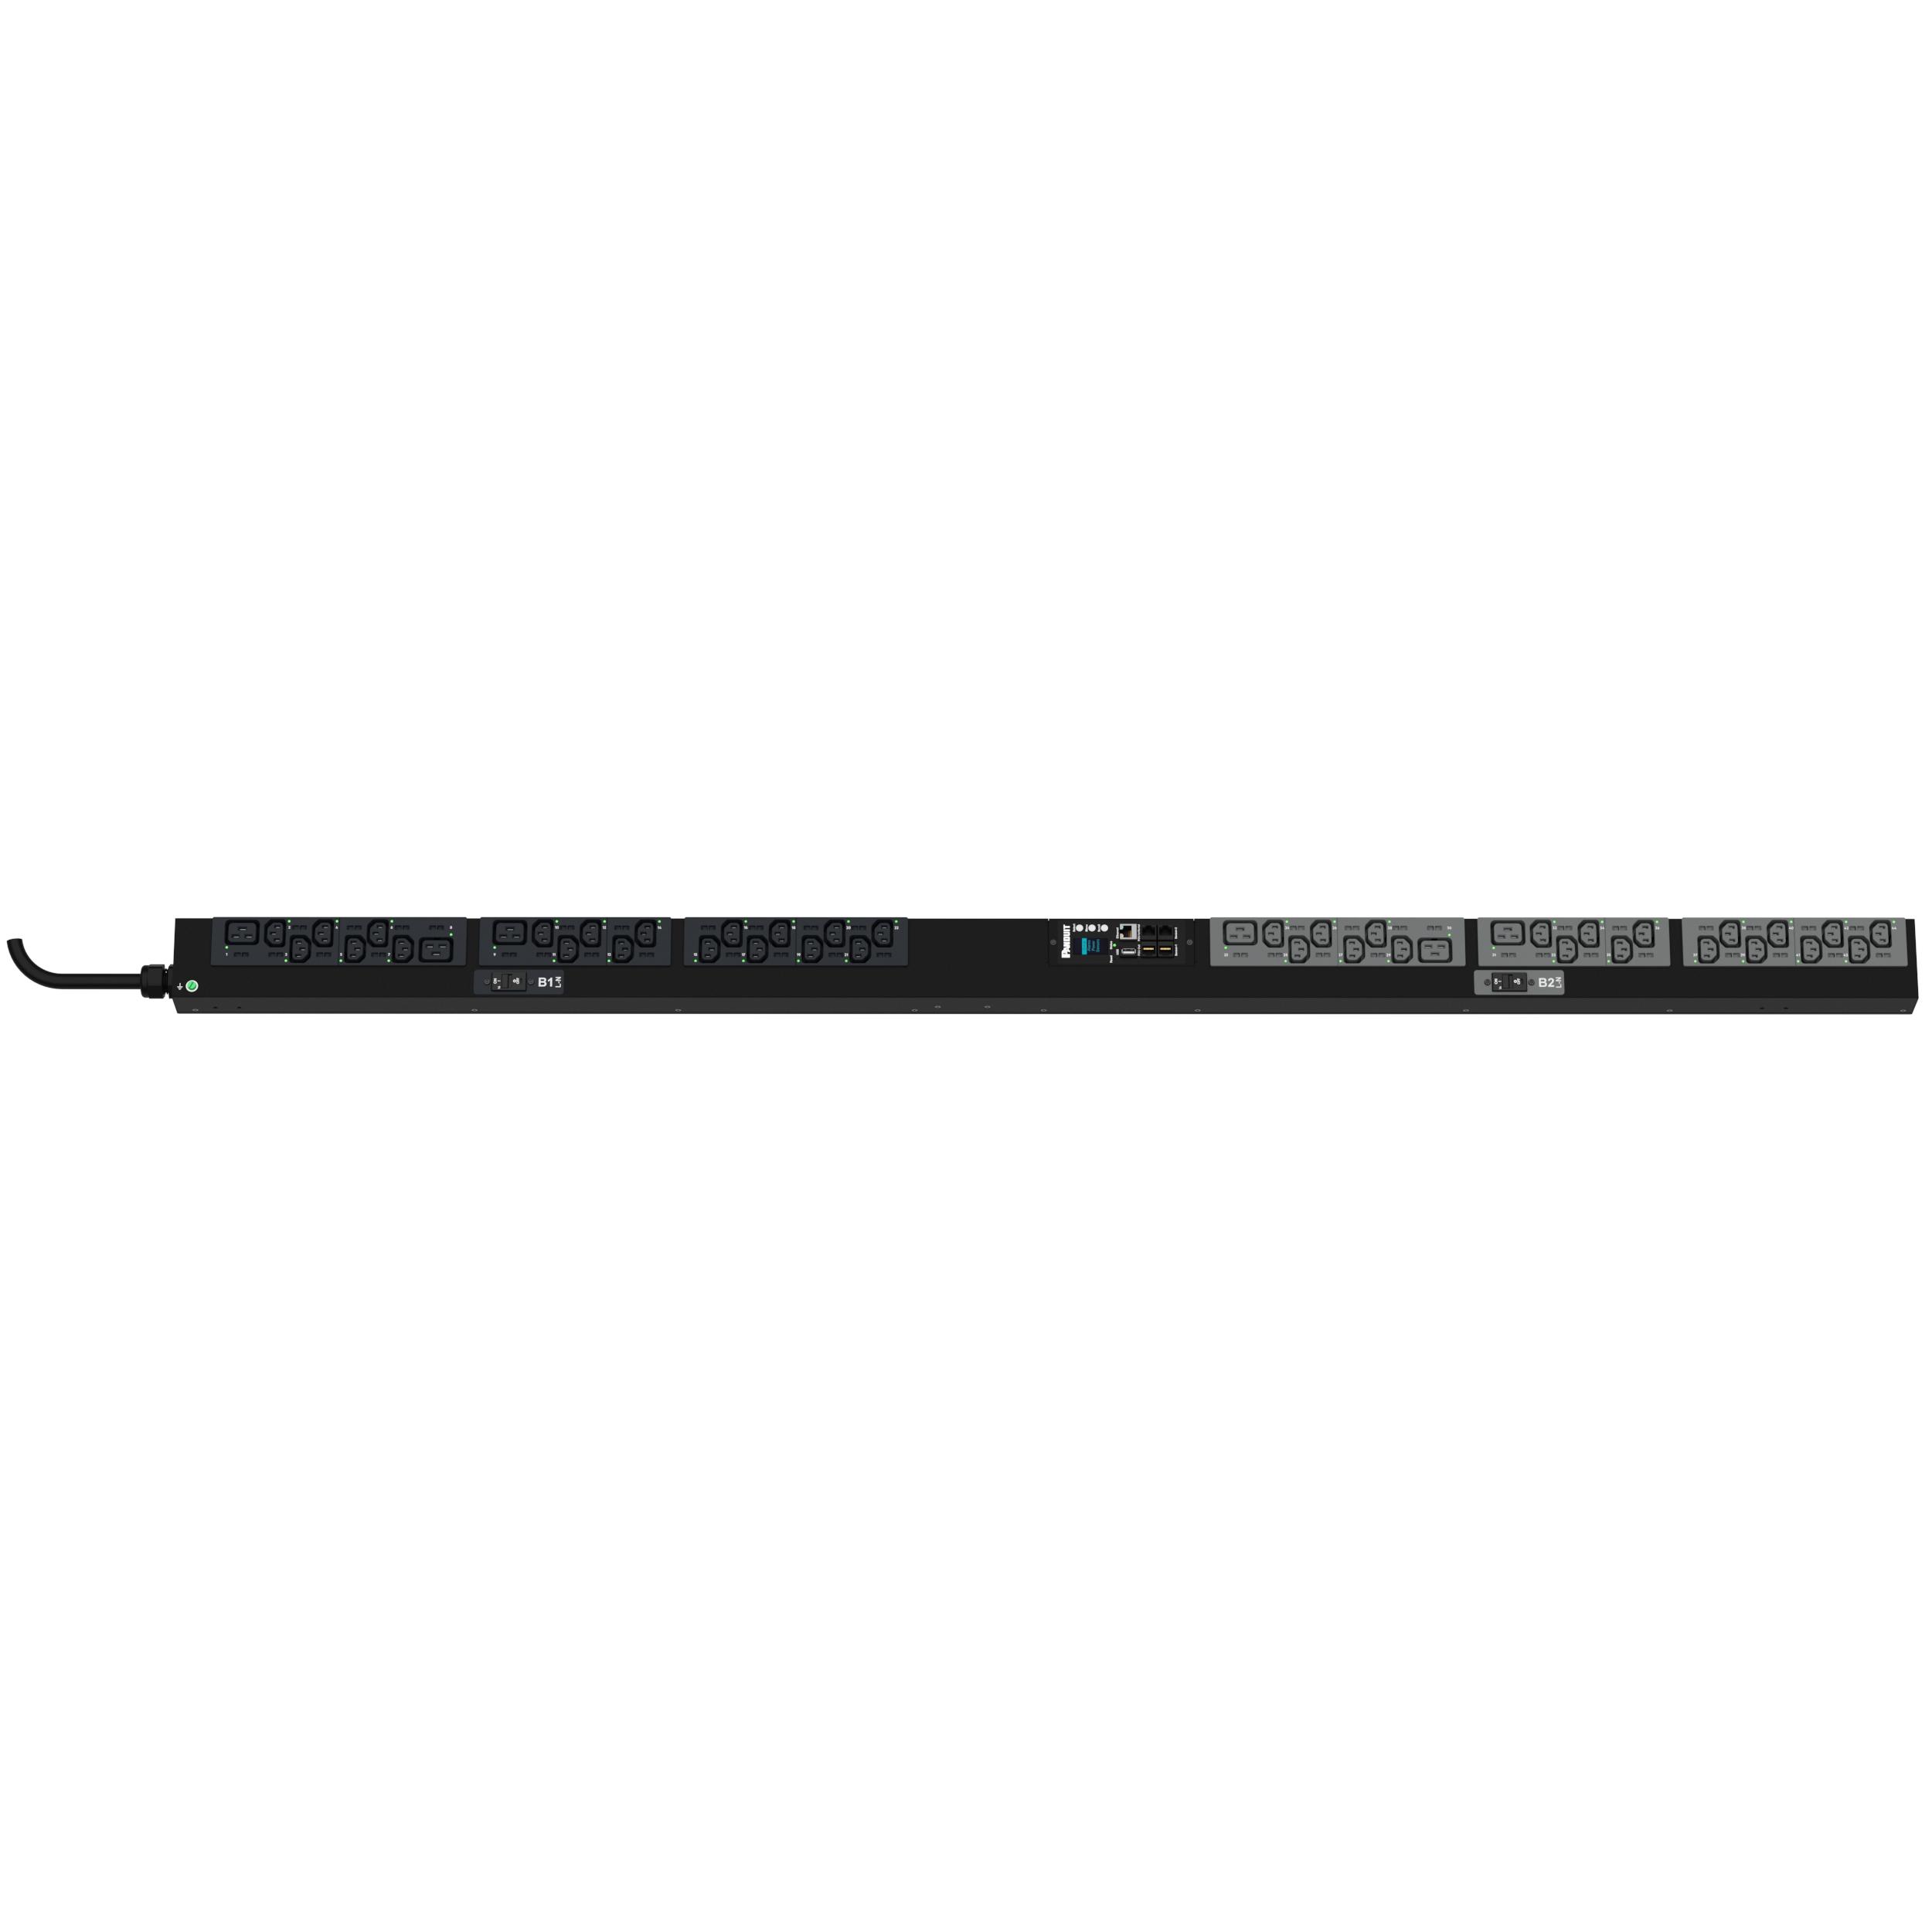 Panduit P44G14M SmartZone™ Monitored & Switched per Outlet PDU